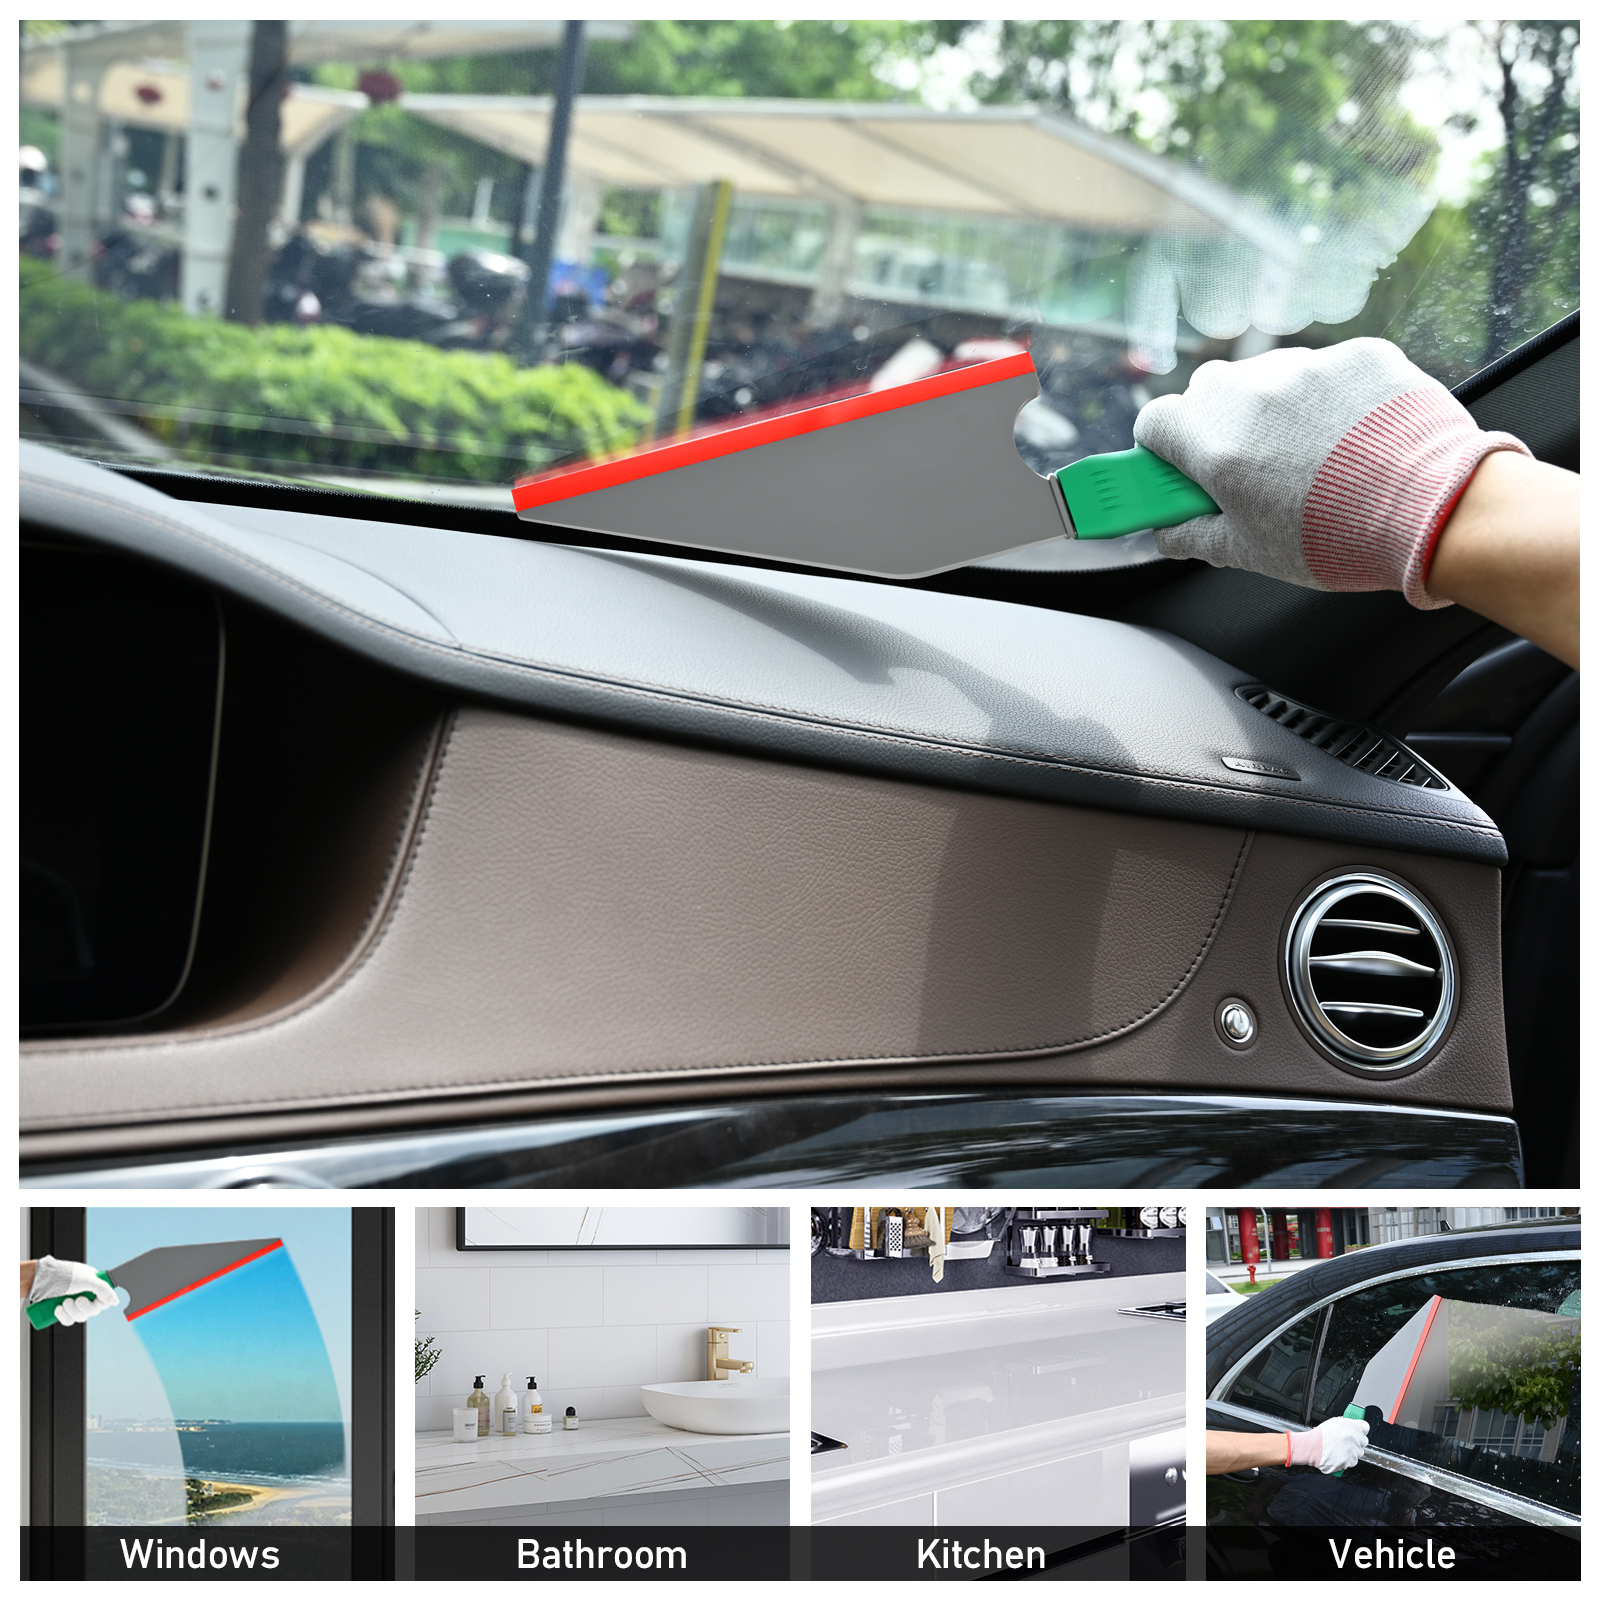 Blue Razor Blade Water Squeegee Auto Film Tint Wiper Scraper Multifunction  Silicone Blade for Car Window Washing Cleaning Tools